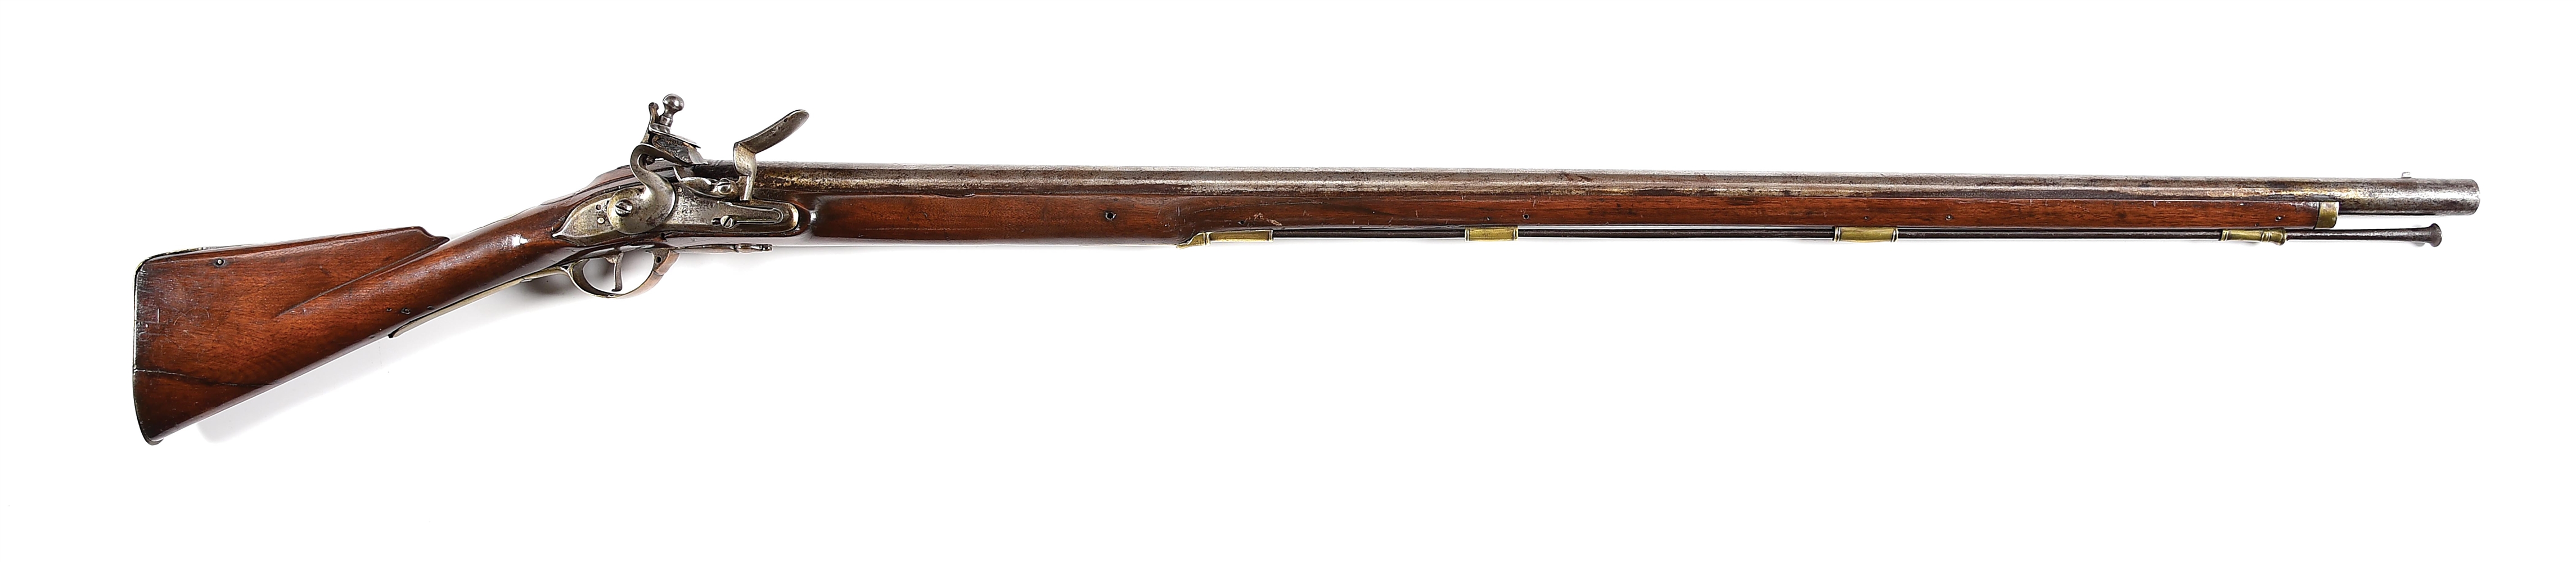 (A) MARYLAND BRANDED COMMITTEE OF SAFETY STYLE MUSKET WITH LOCK MARKED J. J. BEHR.